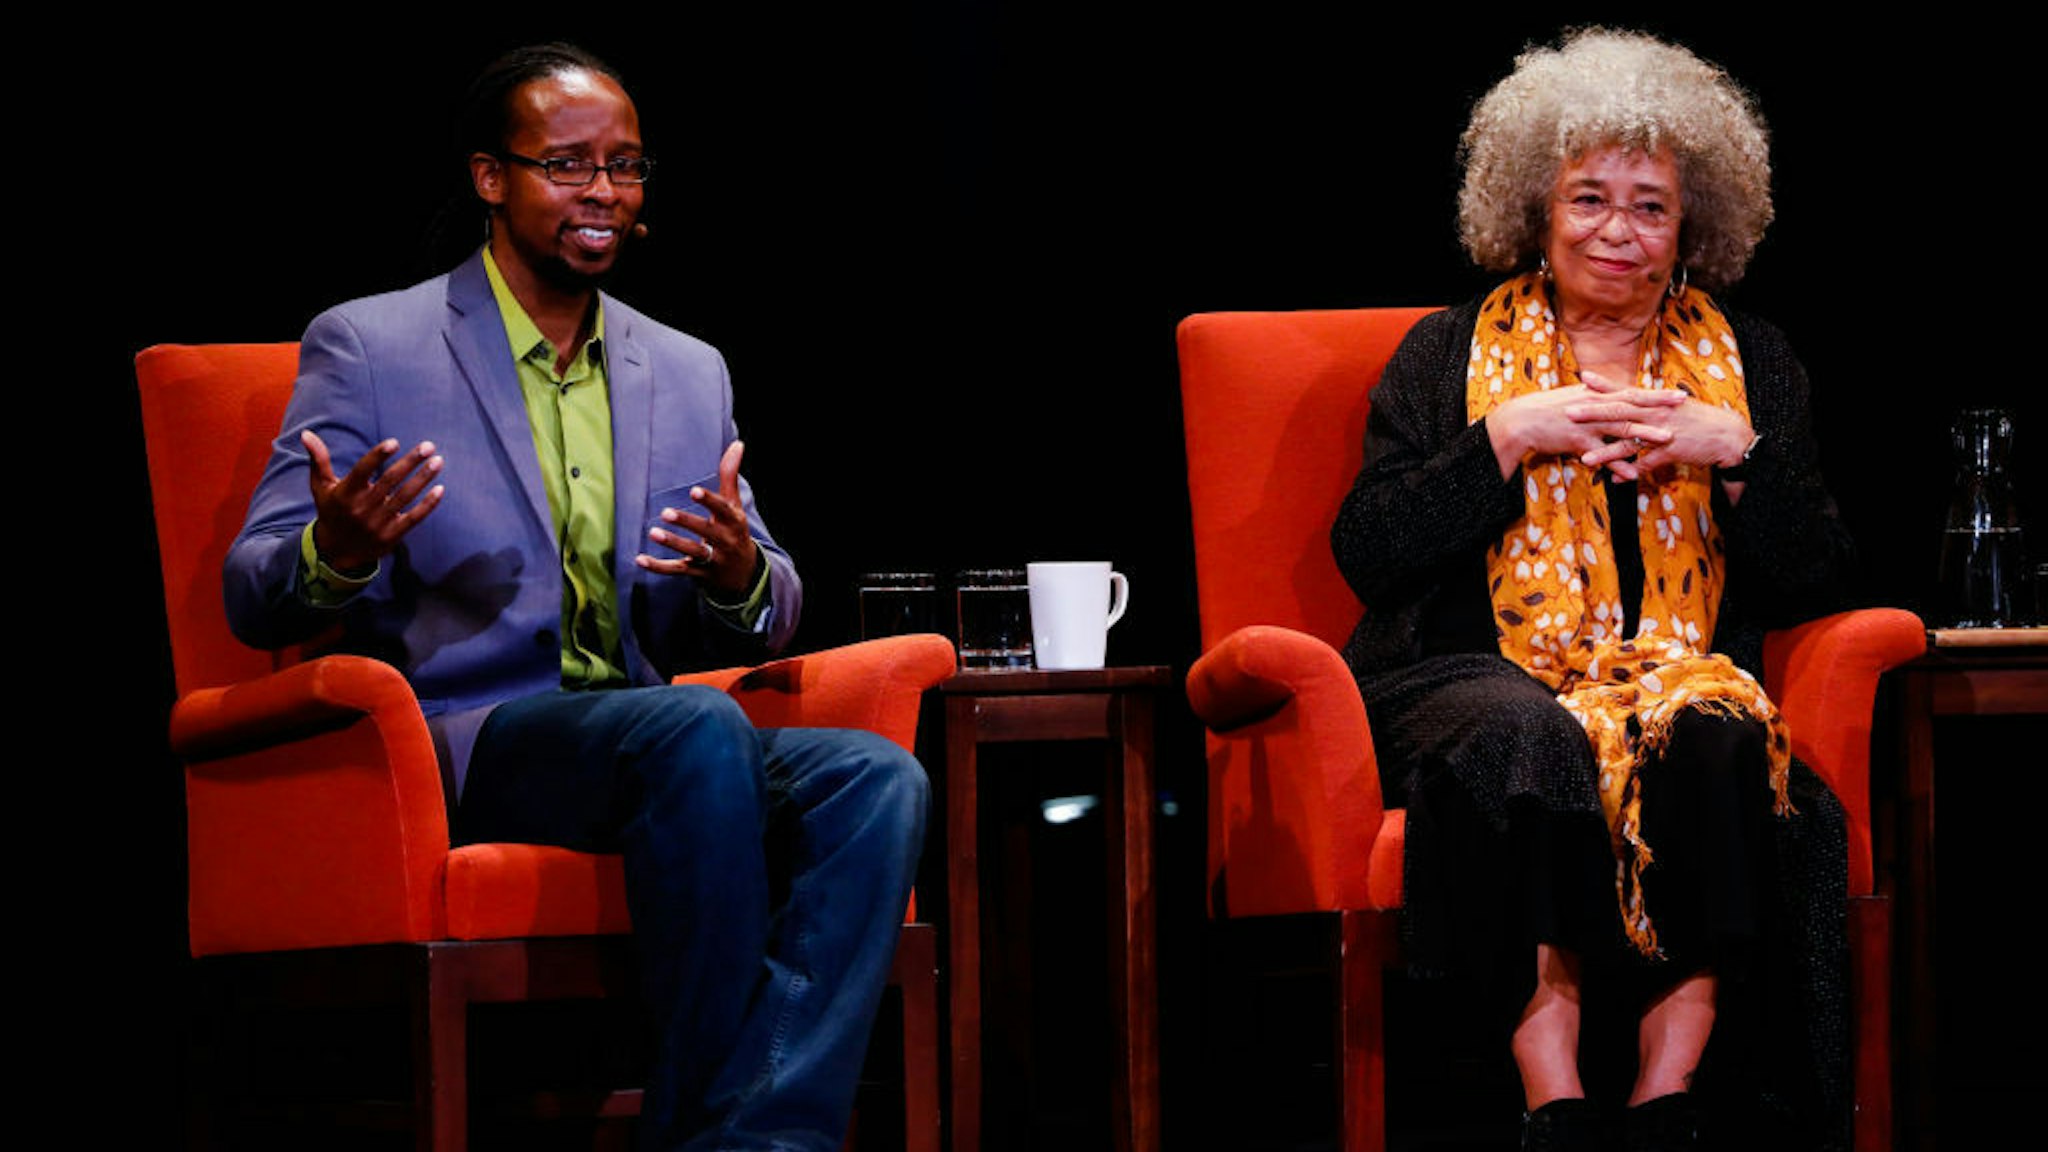 Activist Angela Davis (center) listens during a discussion panel with historian Ibram X. Kendi (left) at City Arts & Lectures in San Francisco, California, on Thursday, Jan. 10, 2019. (Photo by Gabrielle Lurie/San Francisco Chronicle via Getty Images)